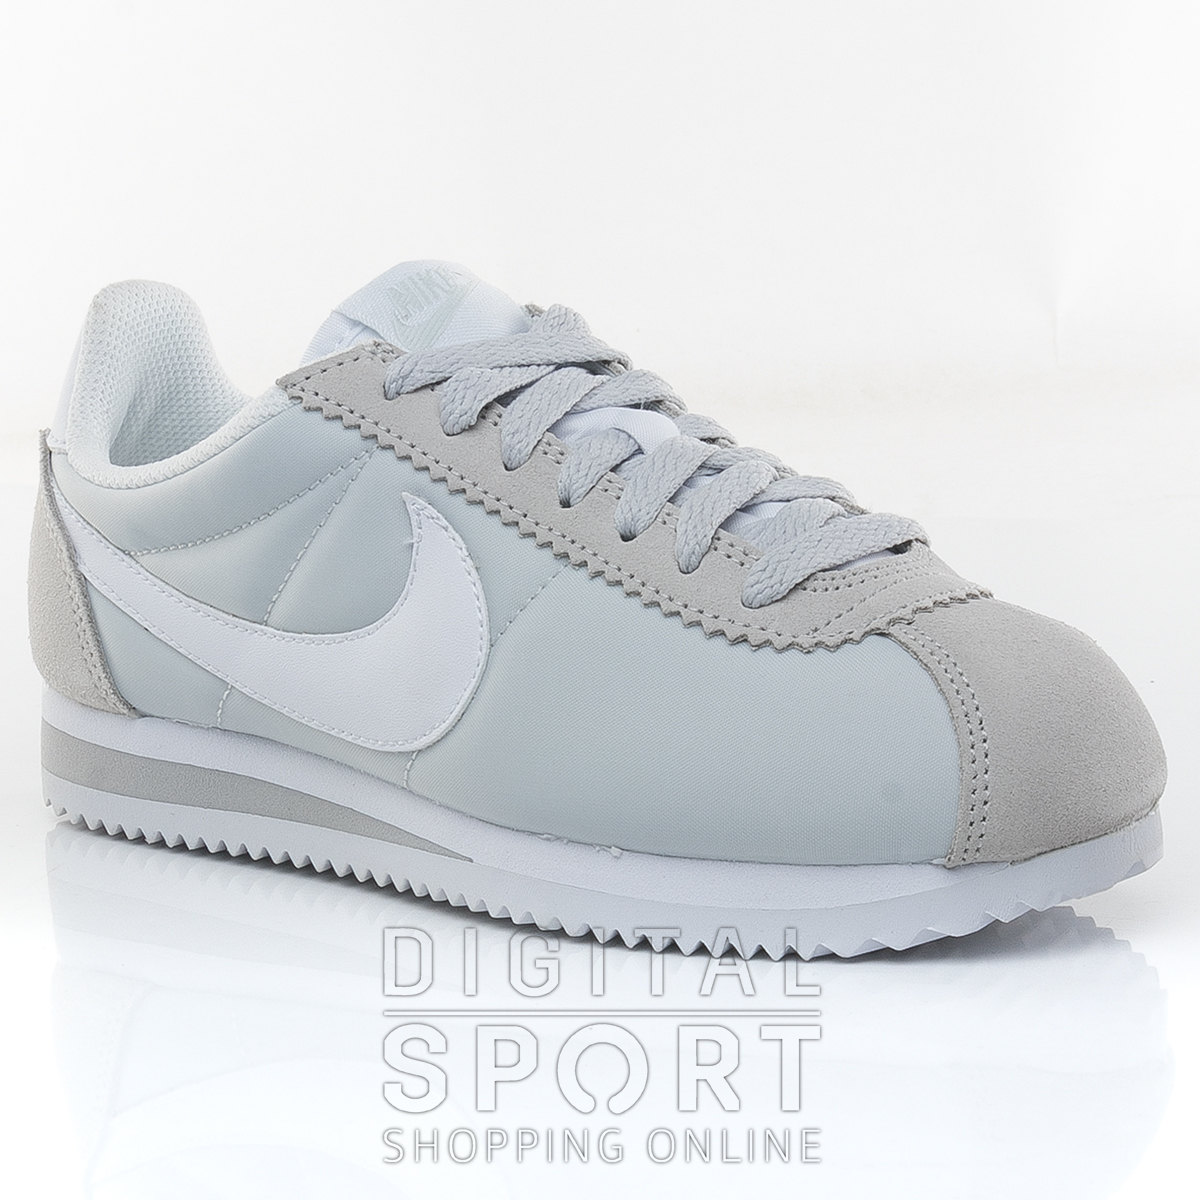 nike nylon cortez mujer where to buy a4d60 236ab